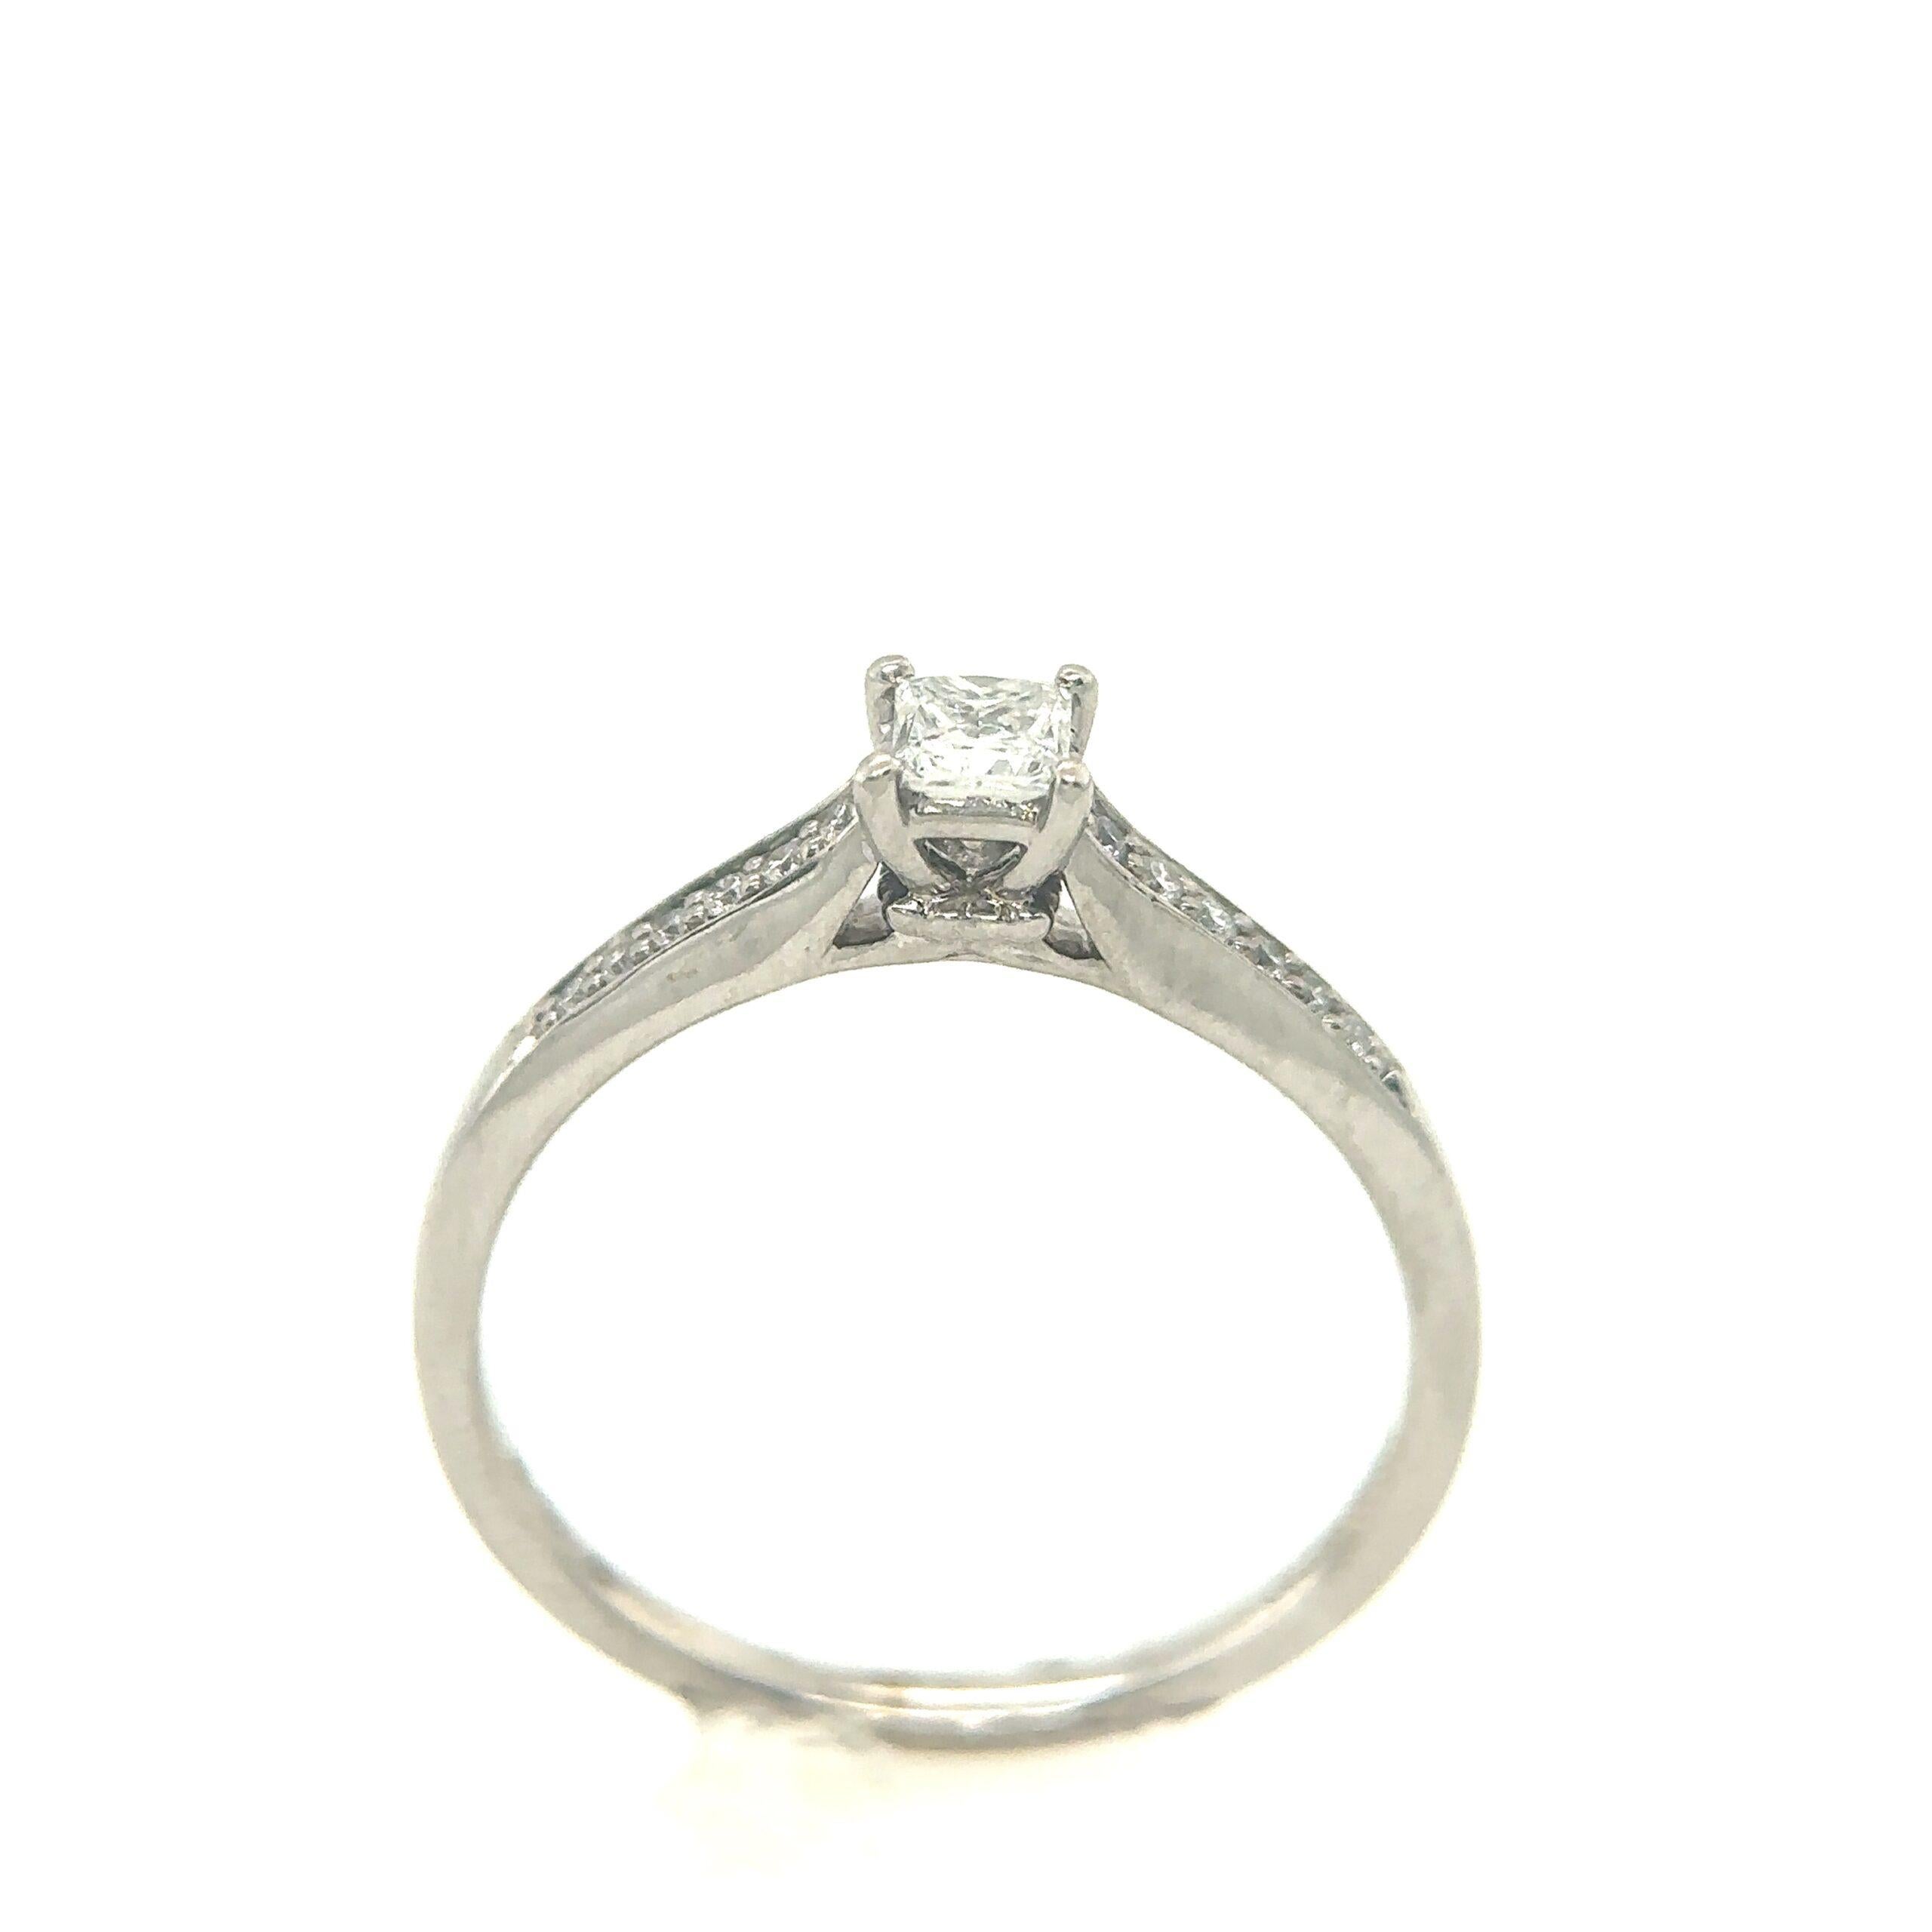 9ct white gold solitaire diamond engagement ring, with 0.22ct centre stone, and 0.06ct of diamonds on the shoulders.

Additional Information:
Total Diamond Weight: 0.22ct + 0.06ct
Diamond Colour: G/H
Diamond Clarity: SI
Total Weight: 2.3g
Width Of